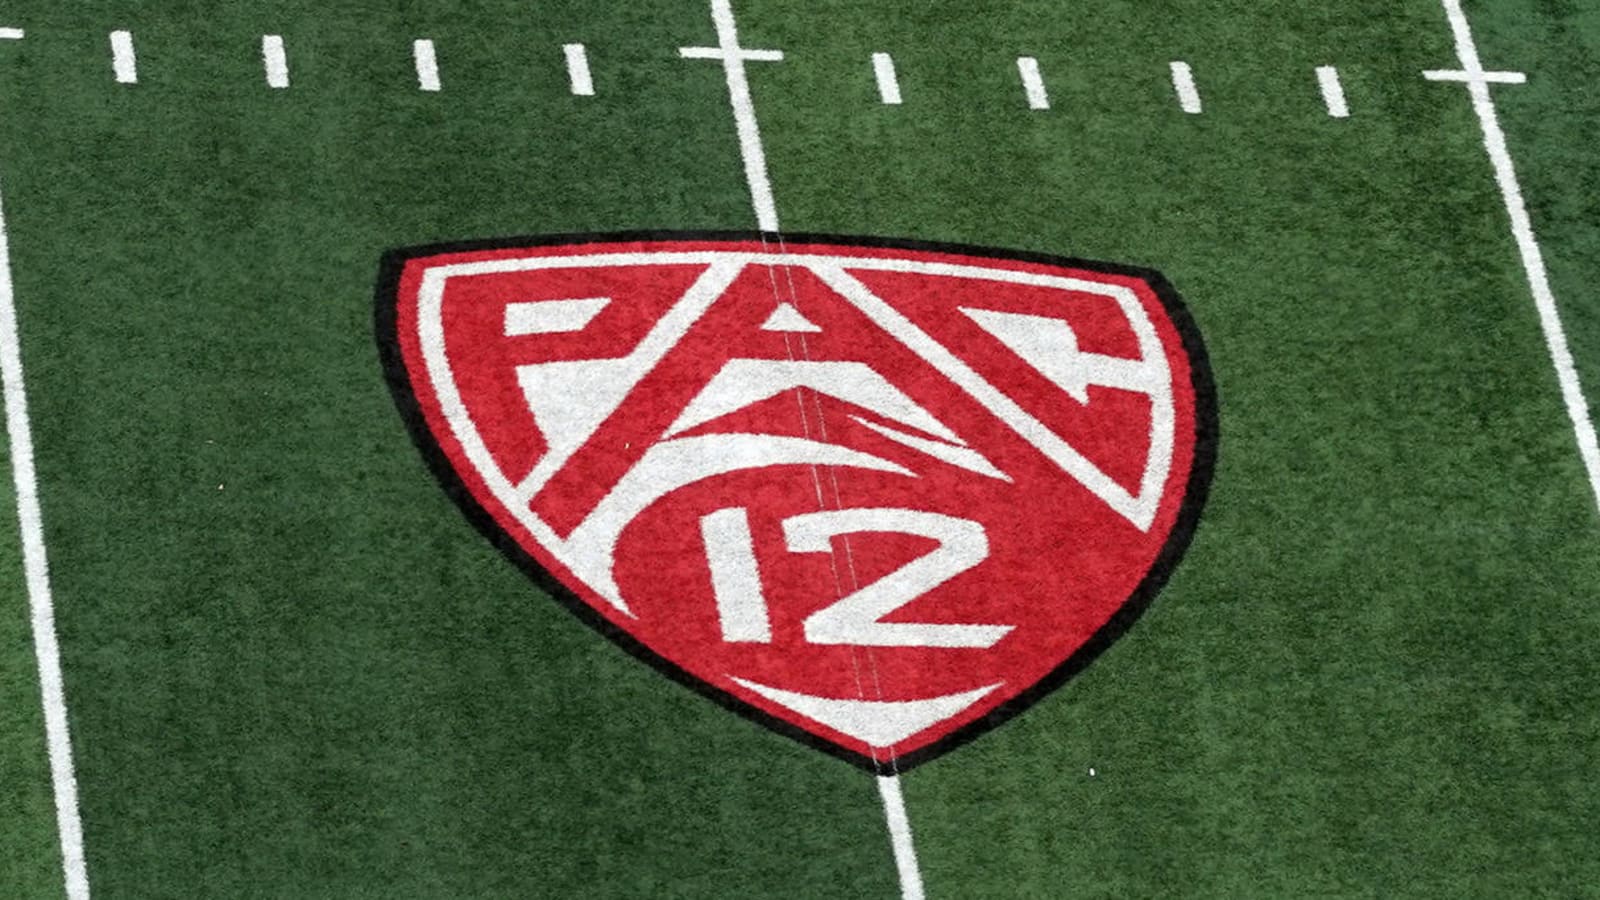 Pac-12 teams could forfeit if unable to play due to COVID